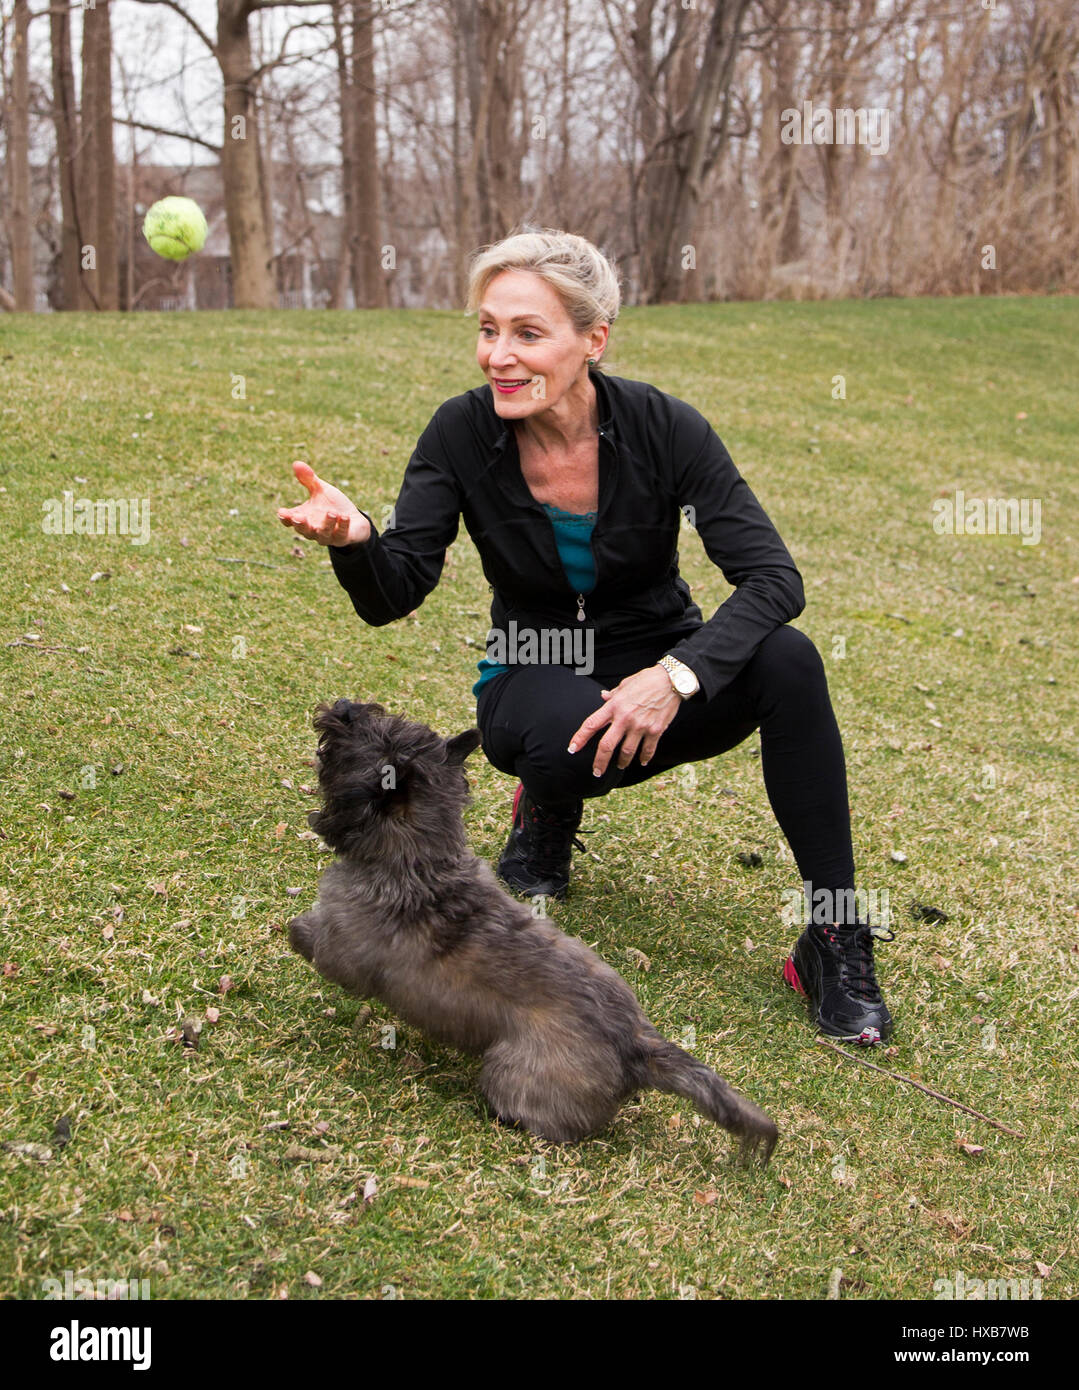 Fit woman playing catch with her dog Stock Photo